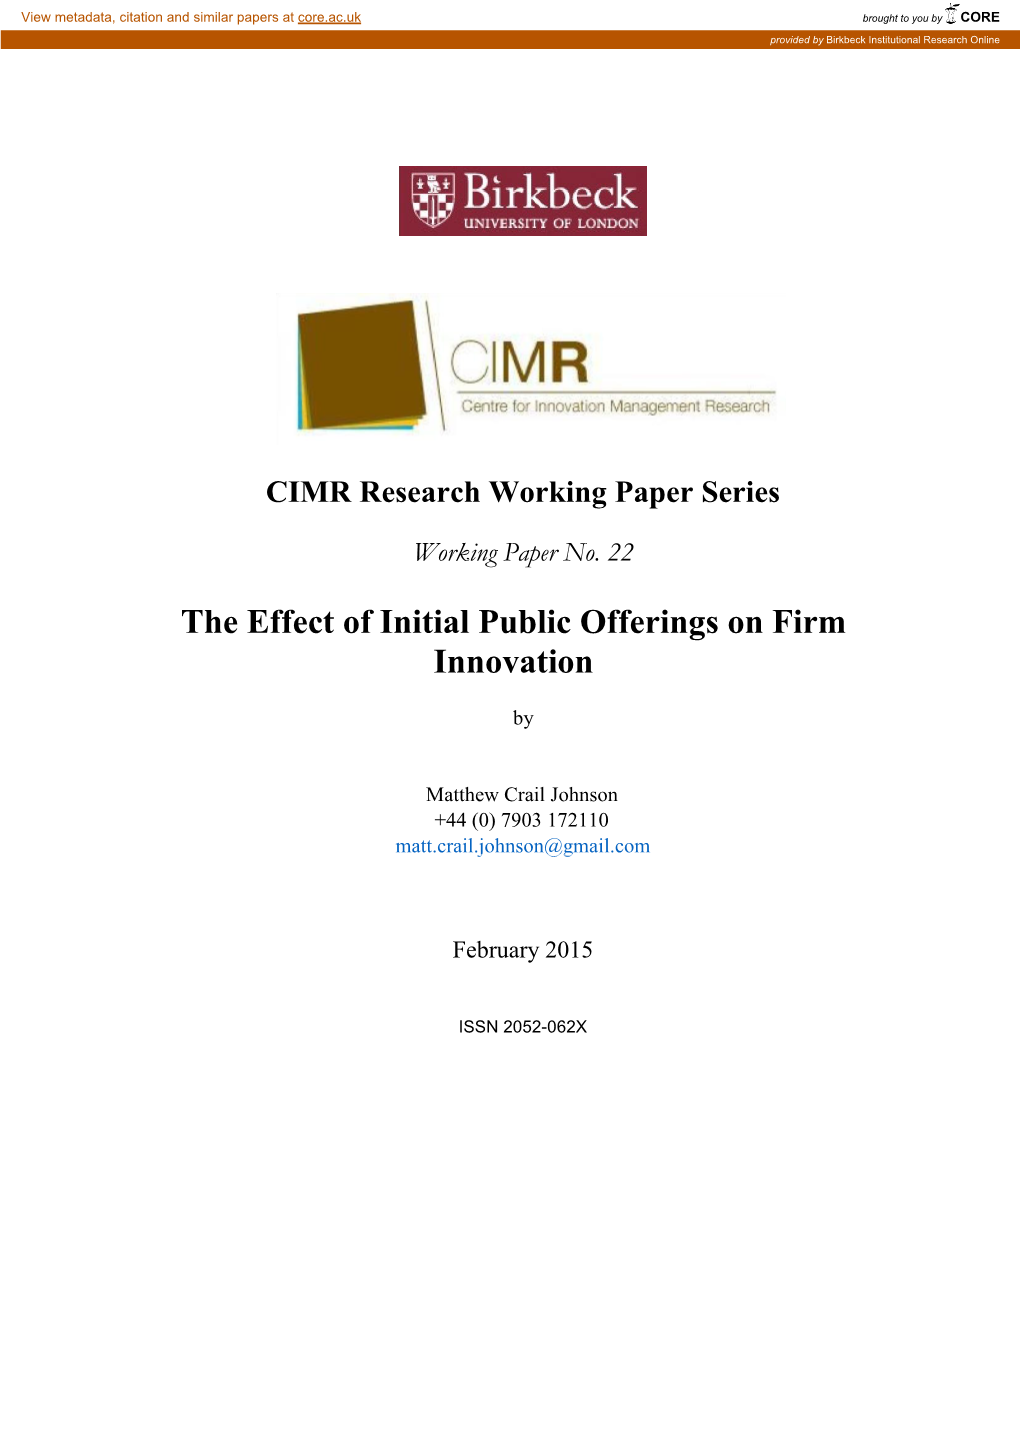 The Effect of Initial Public Offerings on Firm Innovation